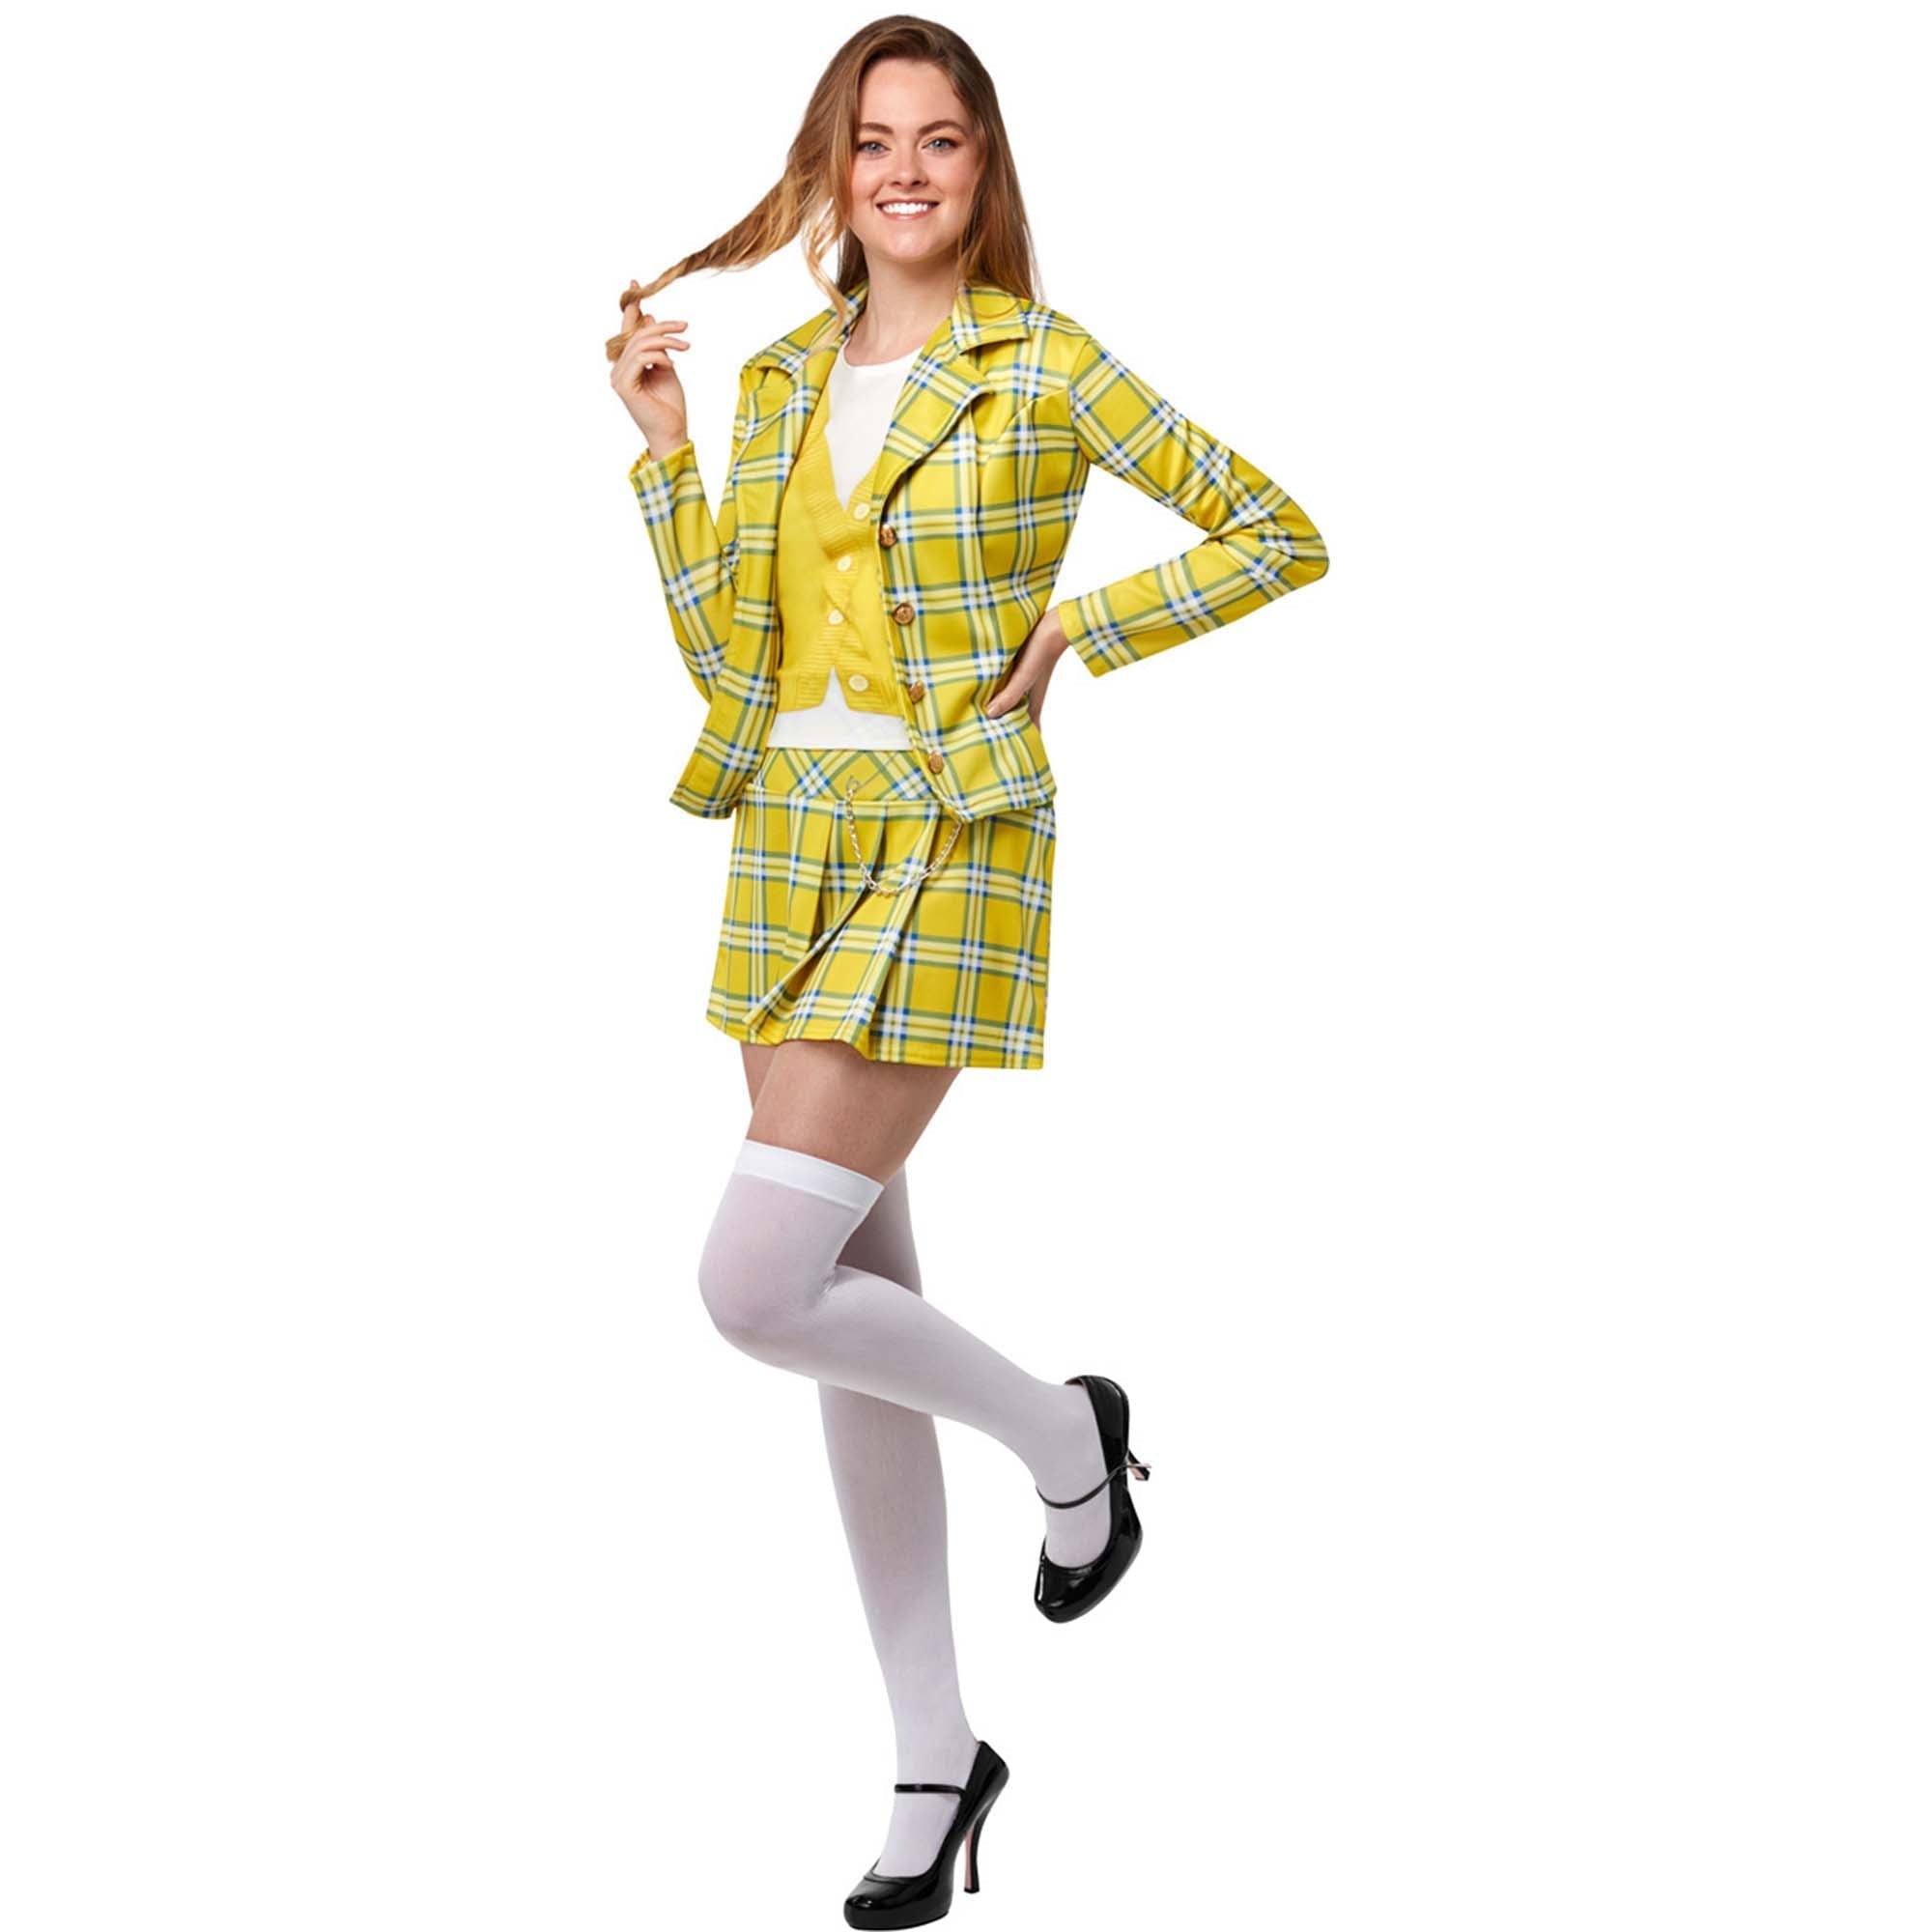 Clueless Cher Costume for Adults, Yellow Jacket and Skirt